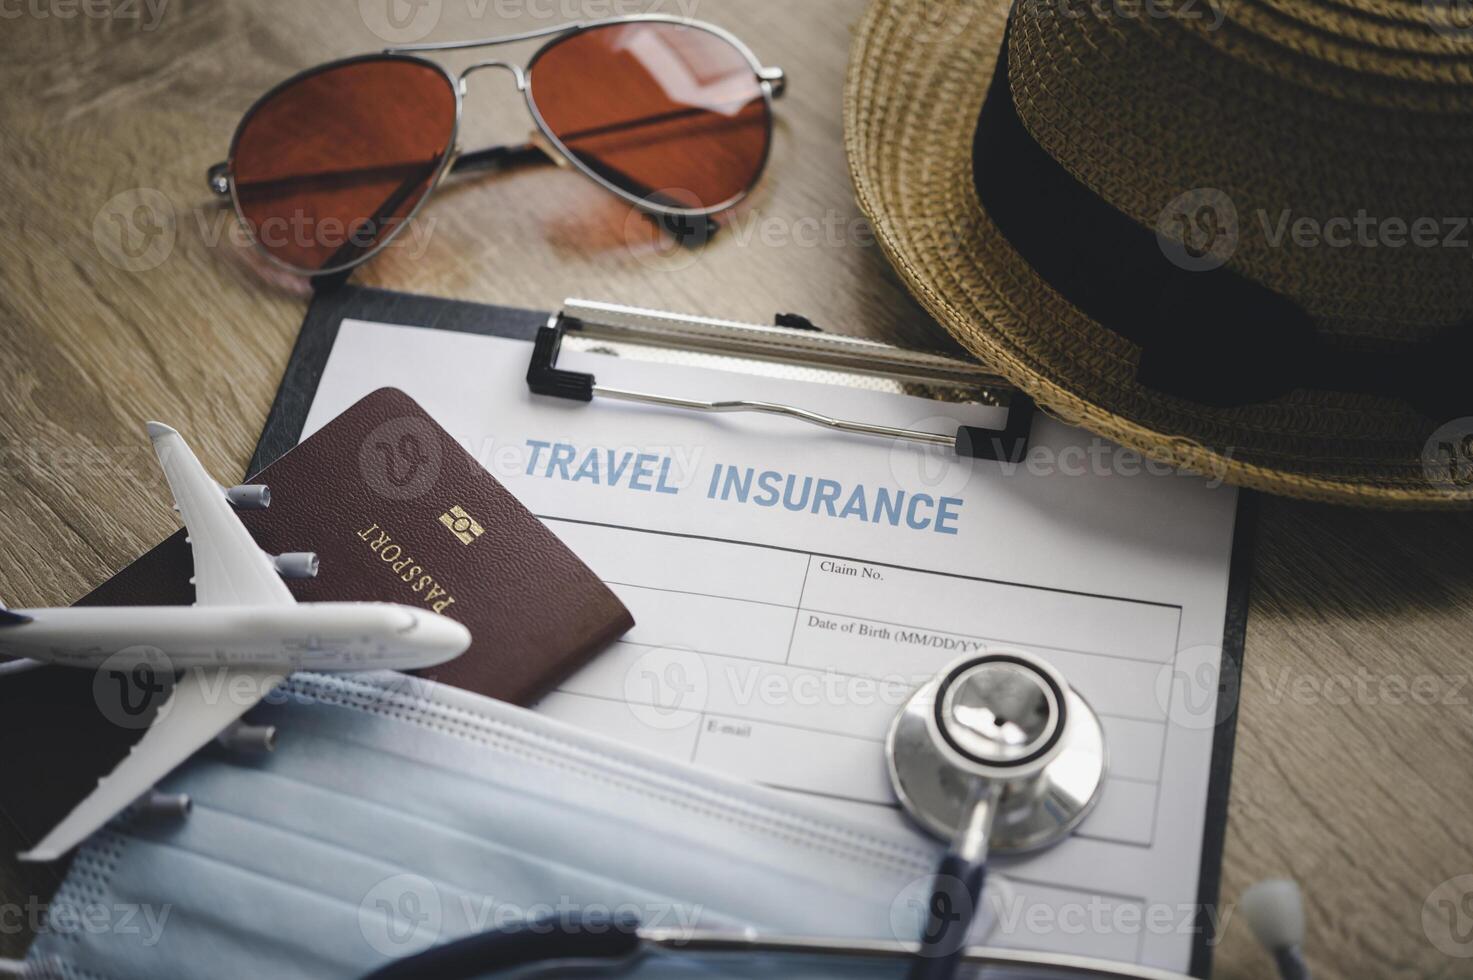 Travel insurance documents to help travelers feel confident in travel safety. photo